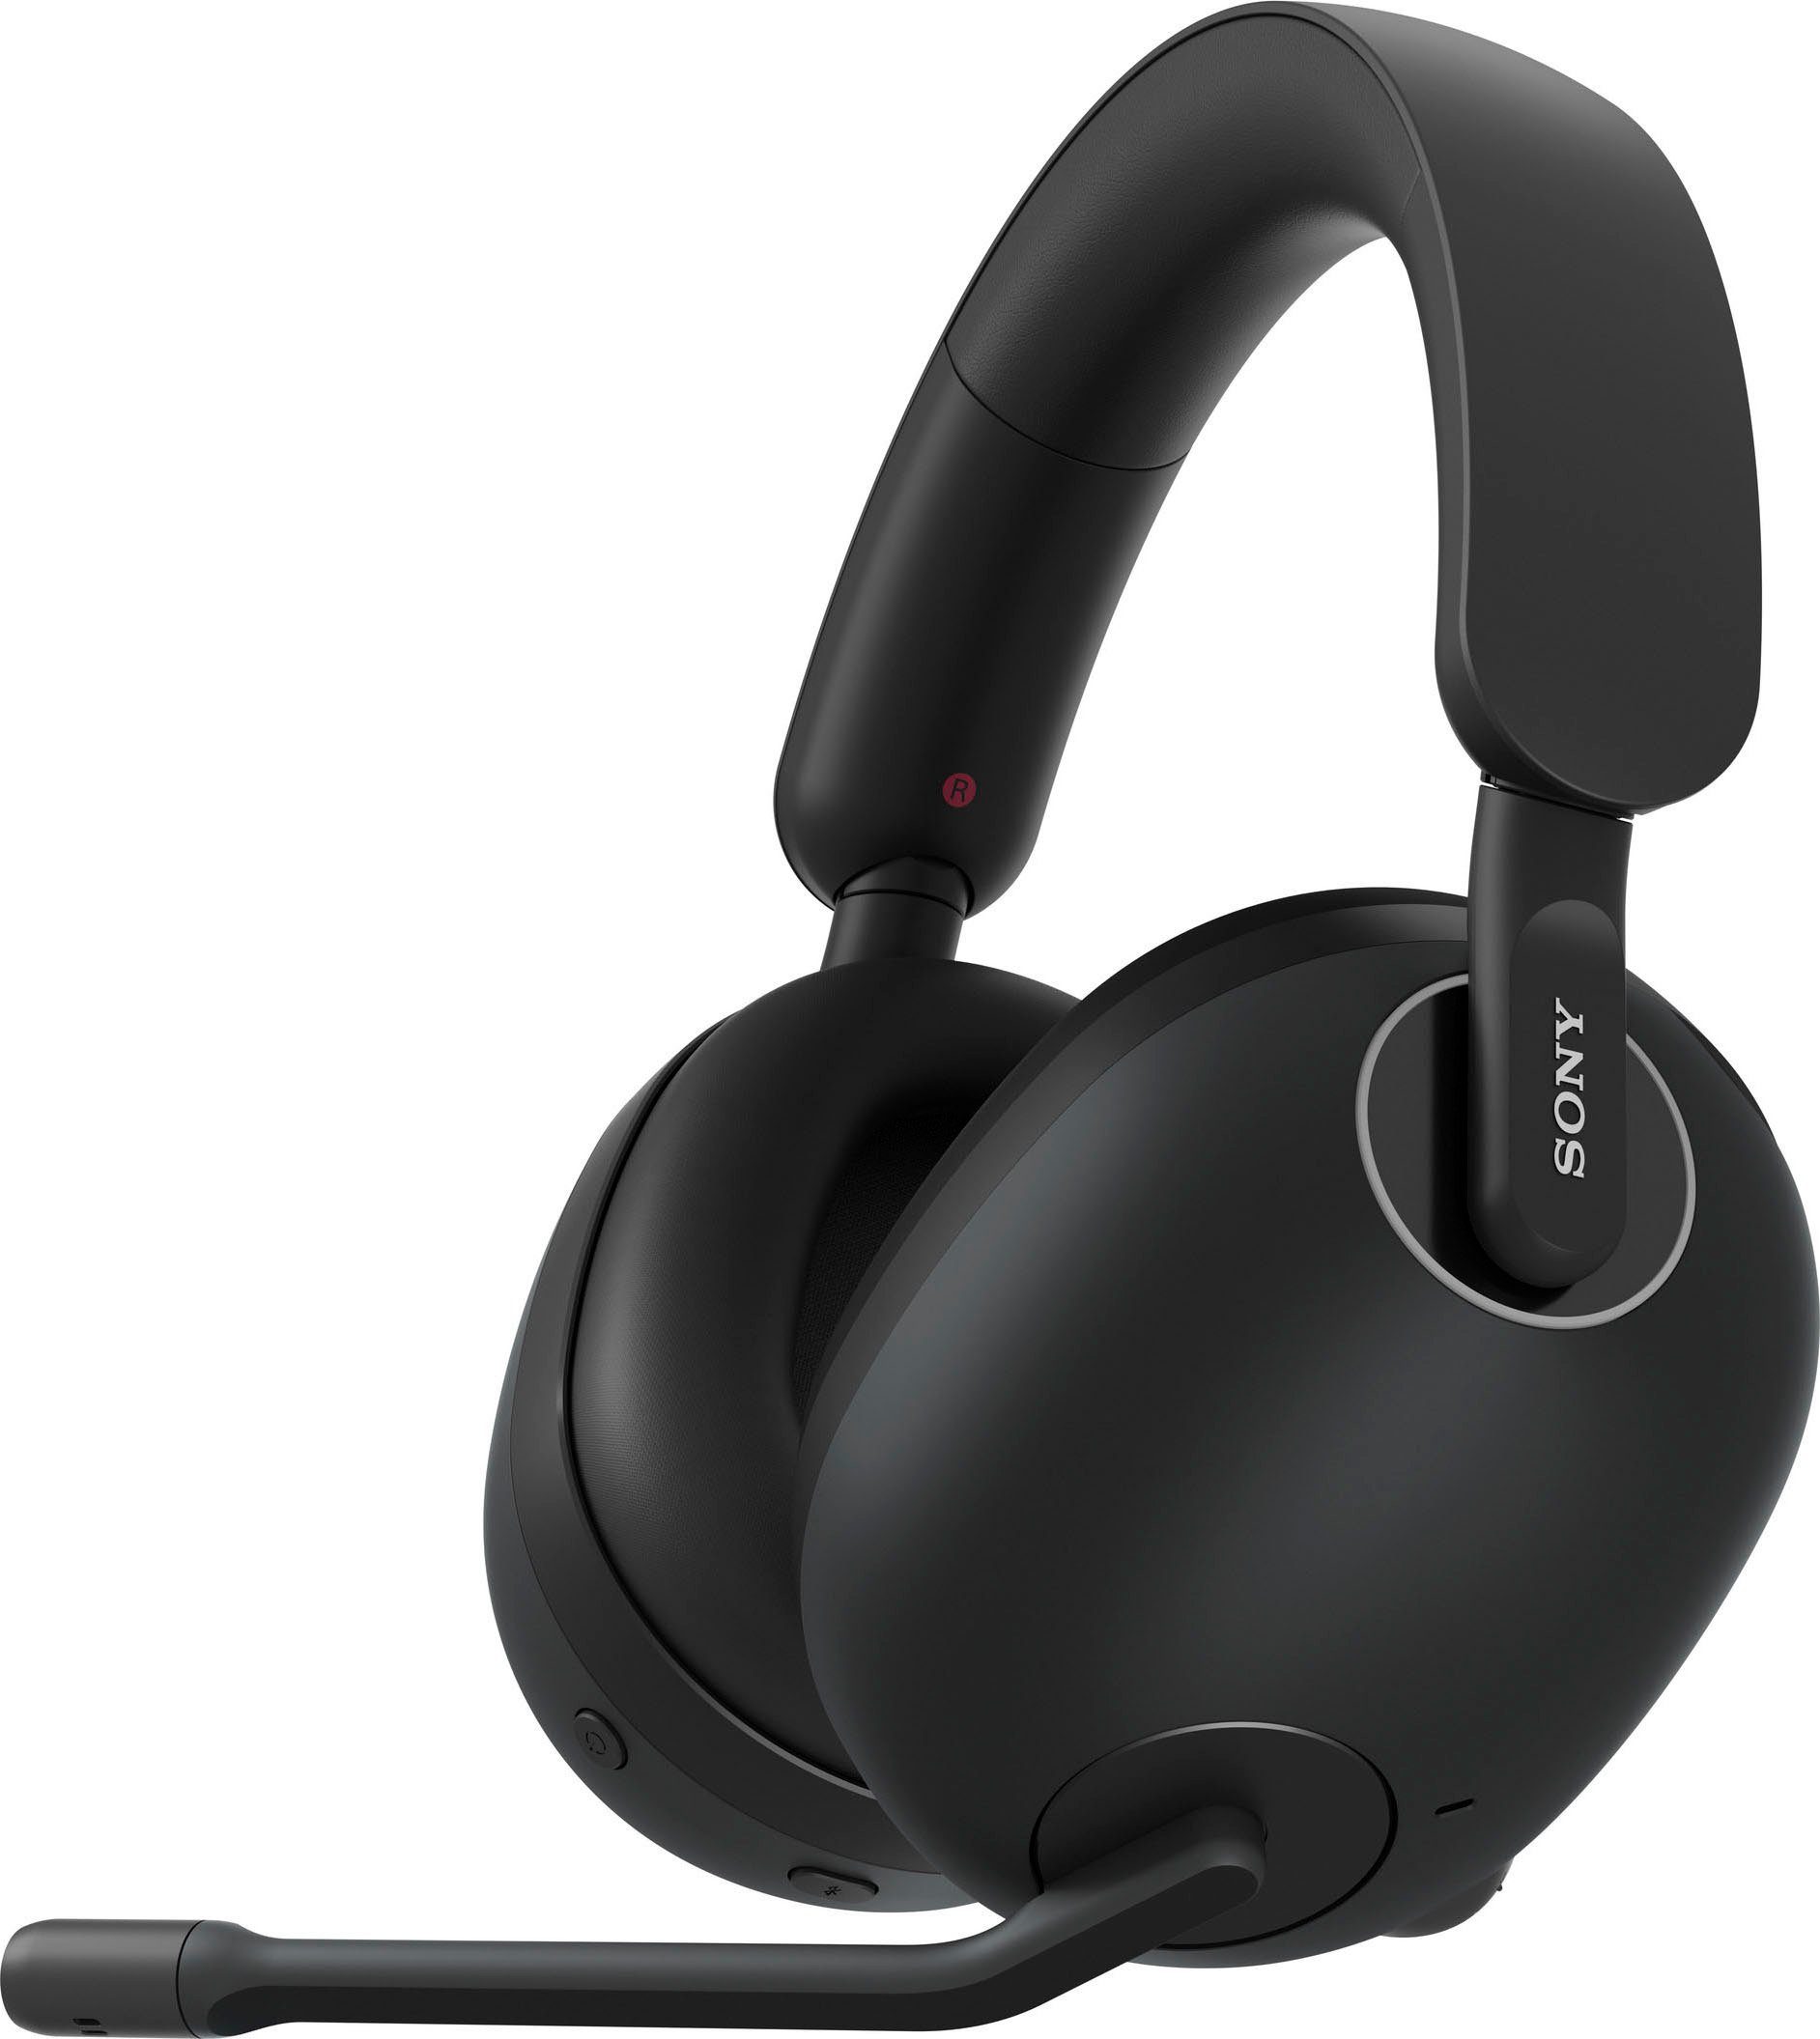 Sony INZONE H9 Gaming-Headset (Active Noise Cancelling (ANC), LED Ladestandsanzeige, Quick Attention Modus, Bluetooth, Wireless)